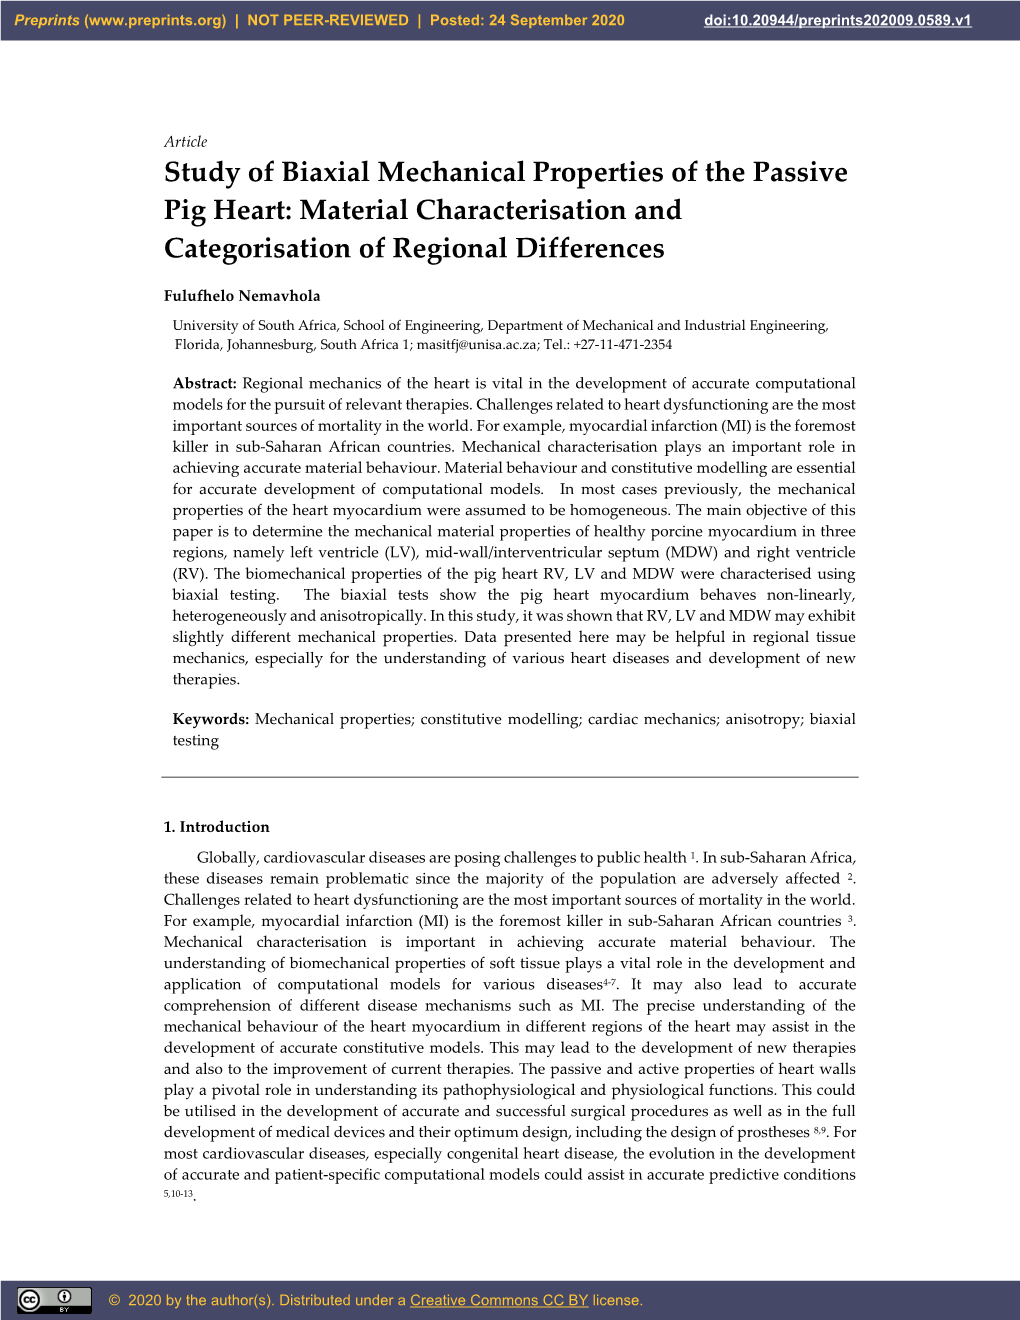 Study of Biaxial Mechanical Properties of the Passive Pig Heart: Material Characterisation and Categorisation of Regional Differences